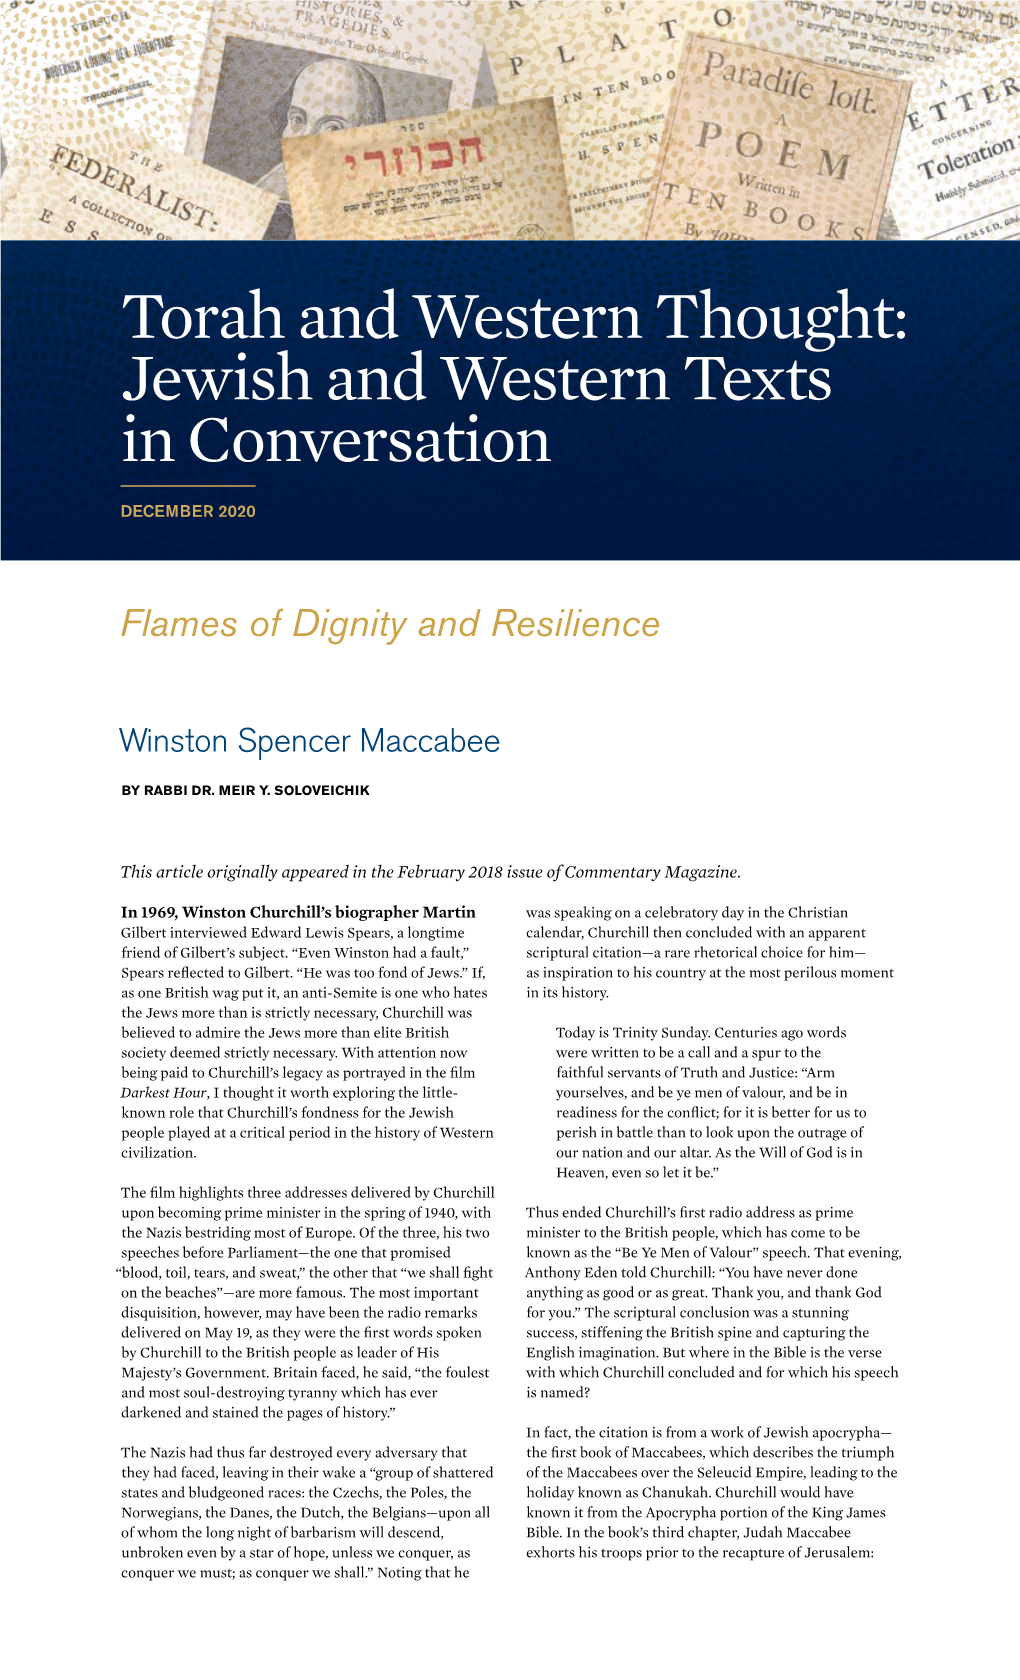 Jewish and Western Texts in Conversation